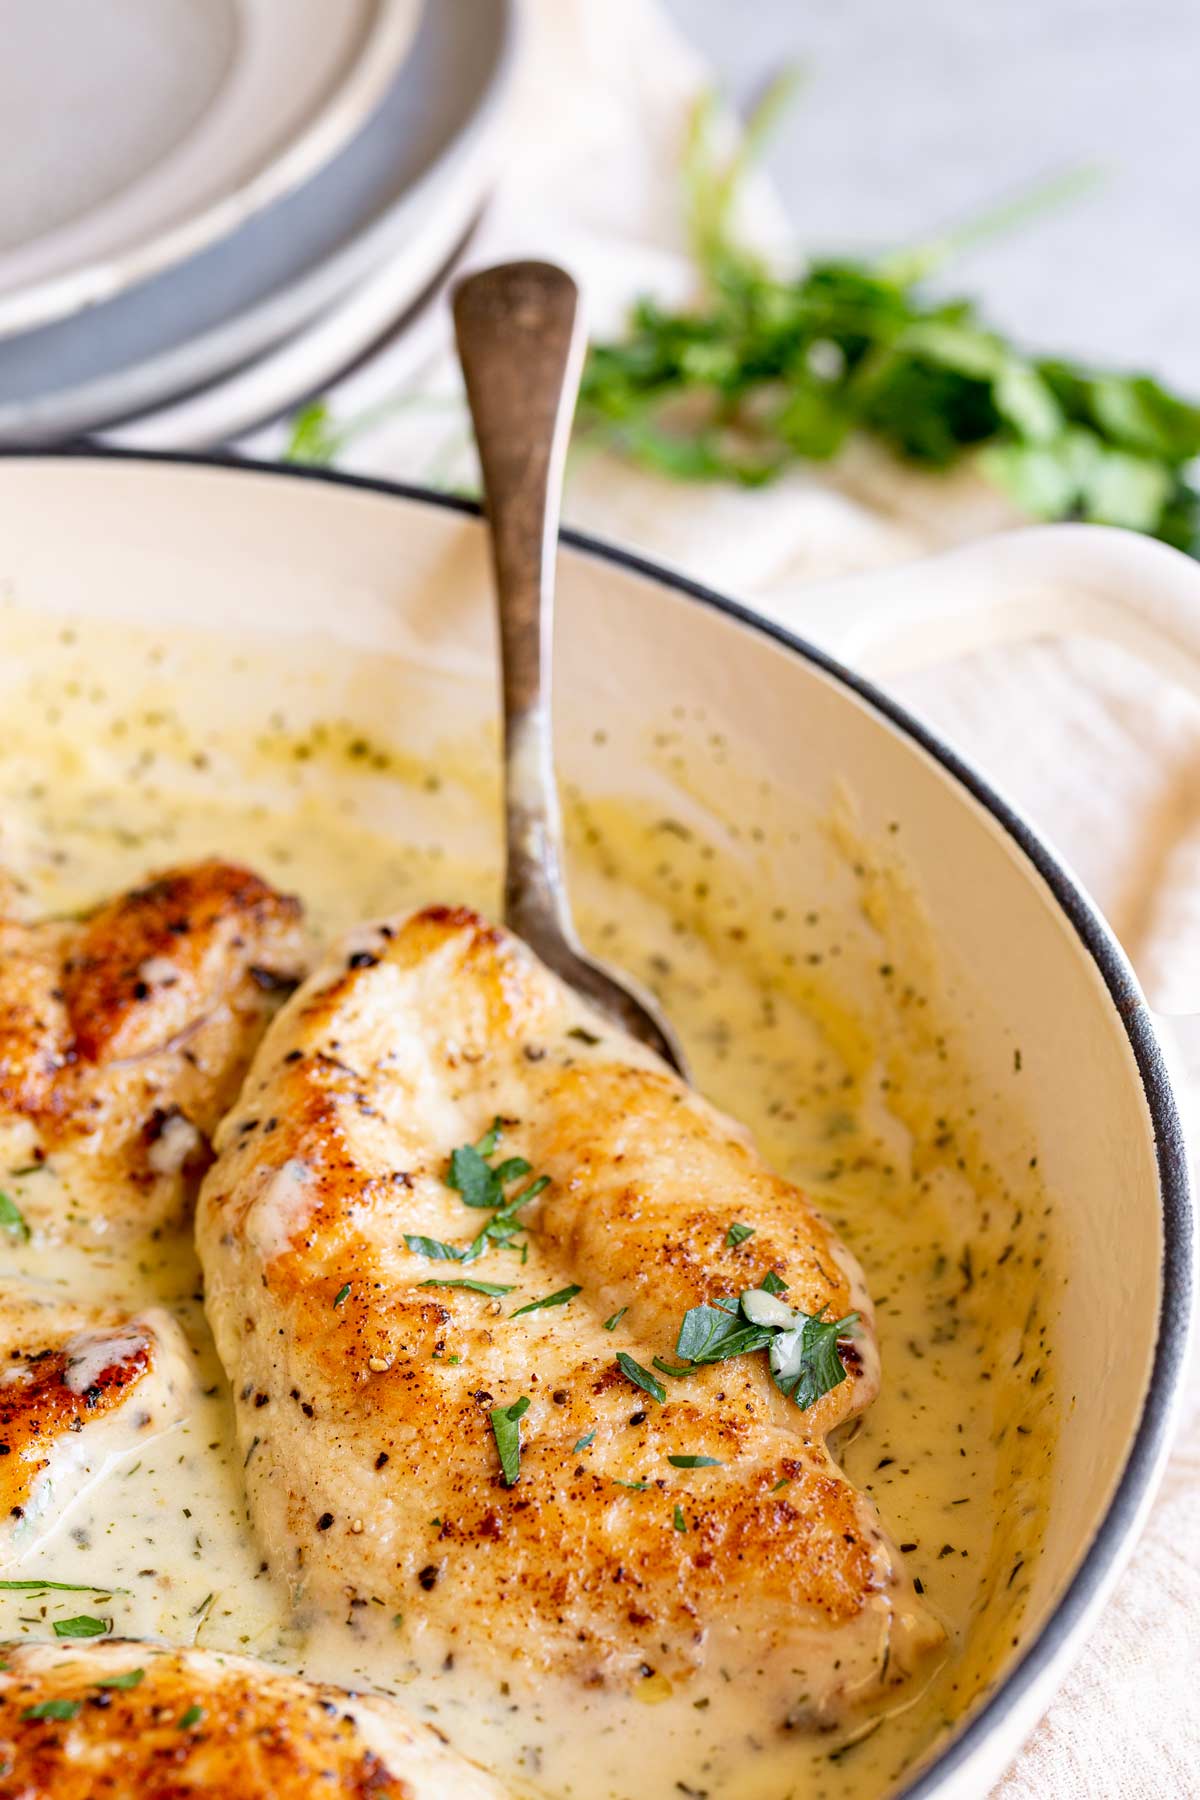 a spoon scooping up a chicken breast from a pan of creamy sauce